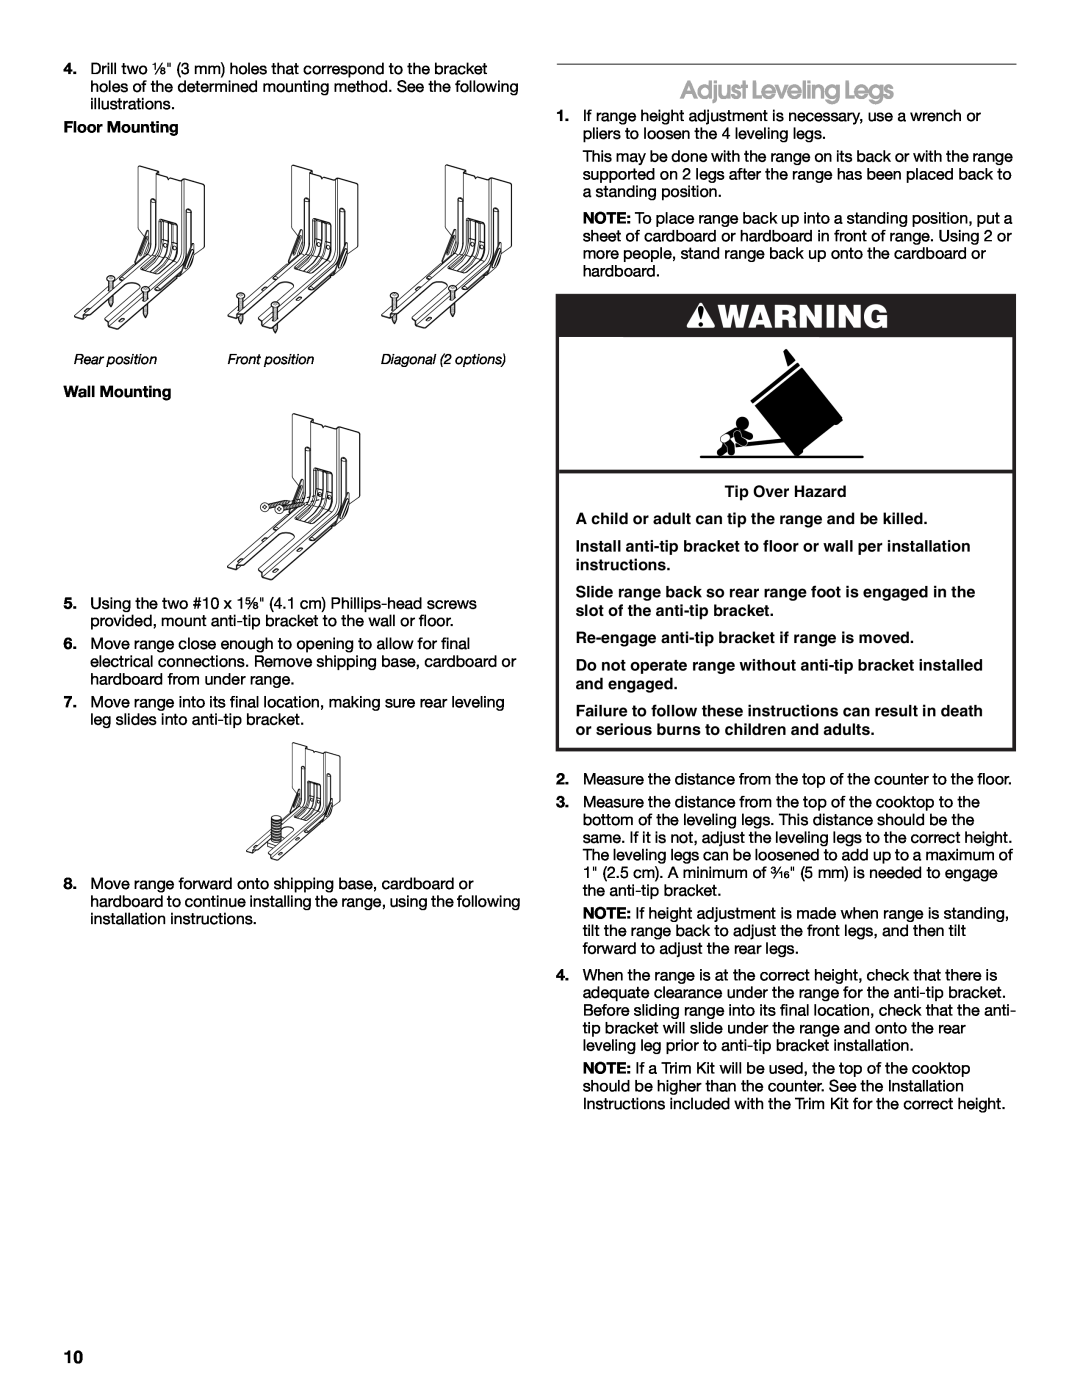 Whirlpool W10665256D installation instructions Adjust Leveling Legs, Floor Mounting, Wall Mounting 